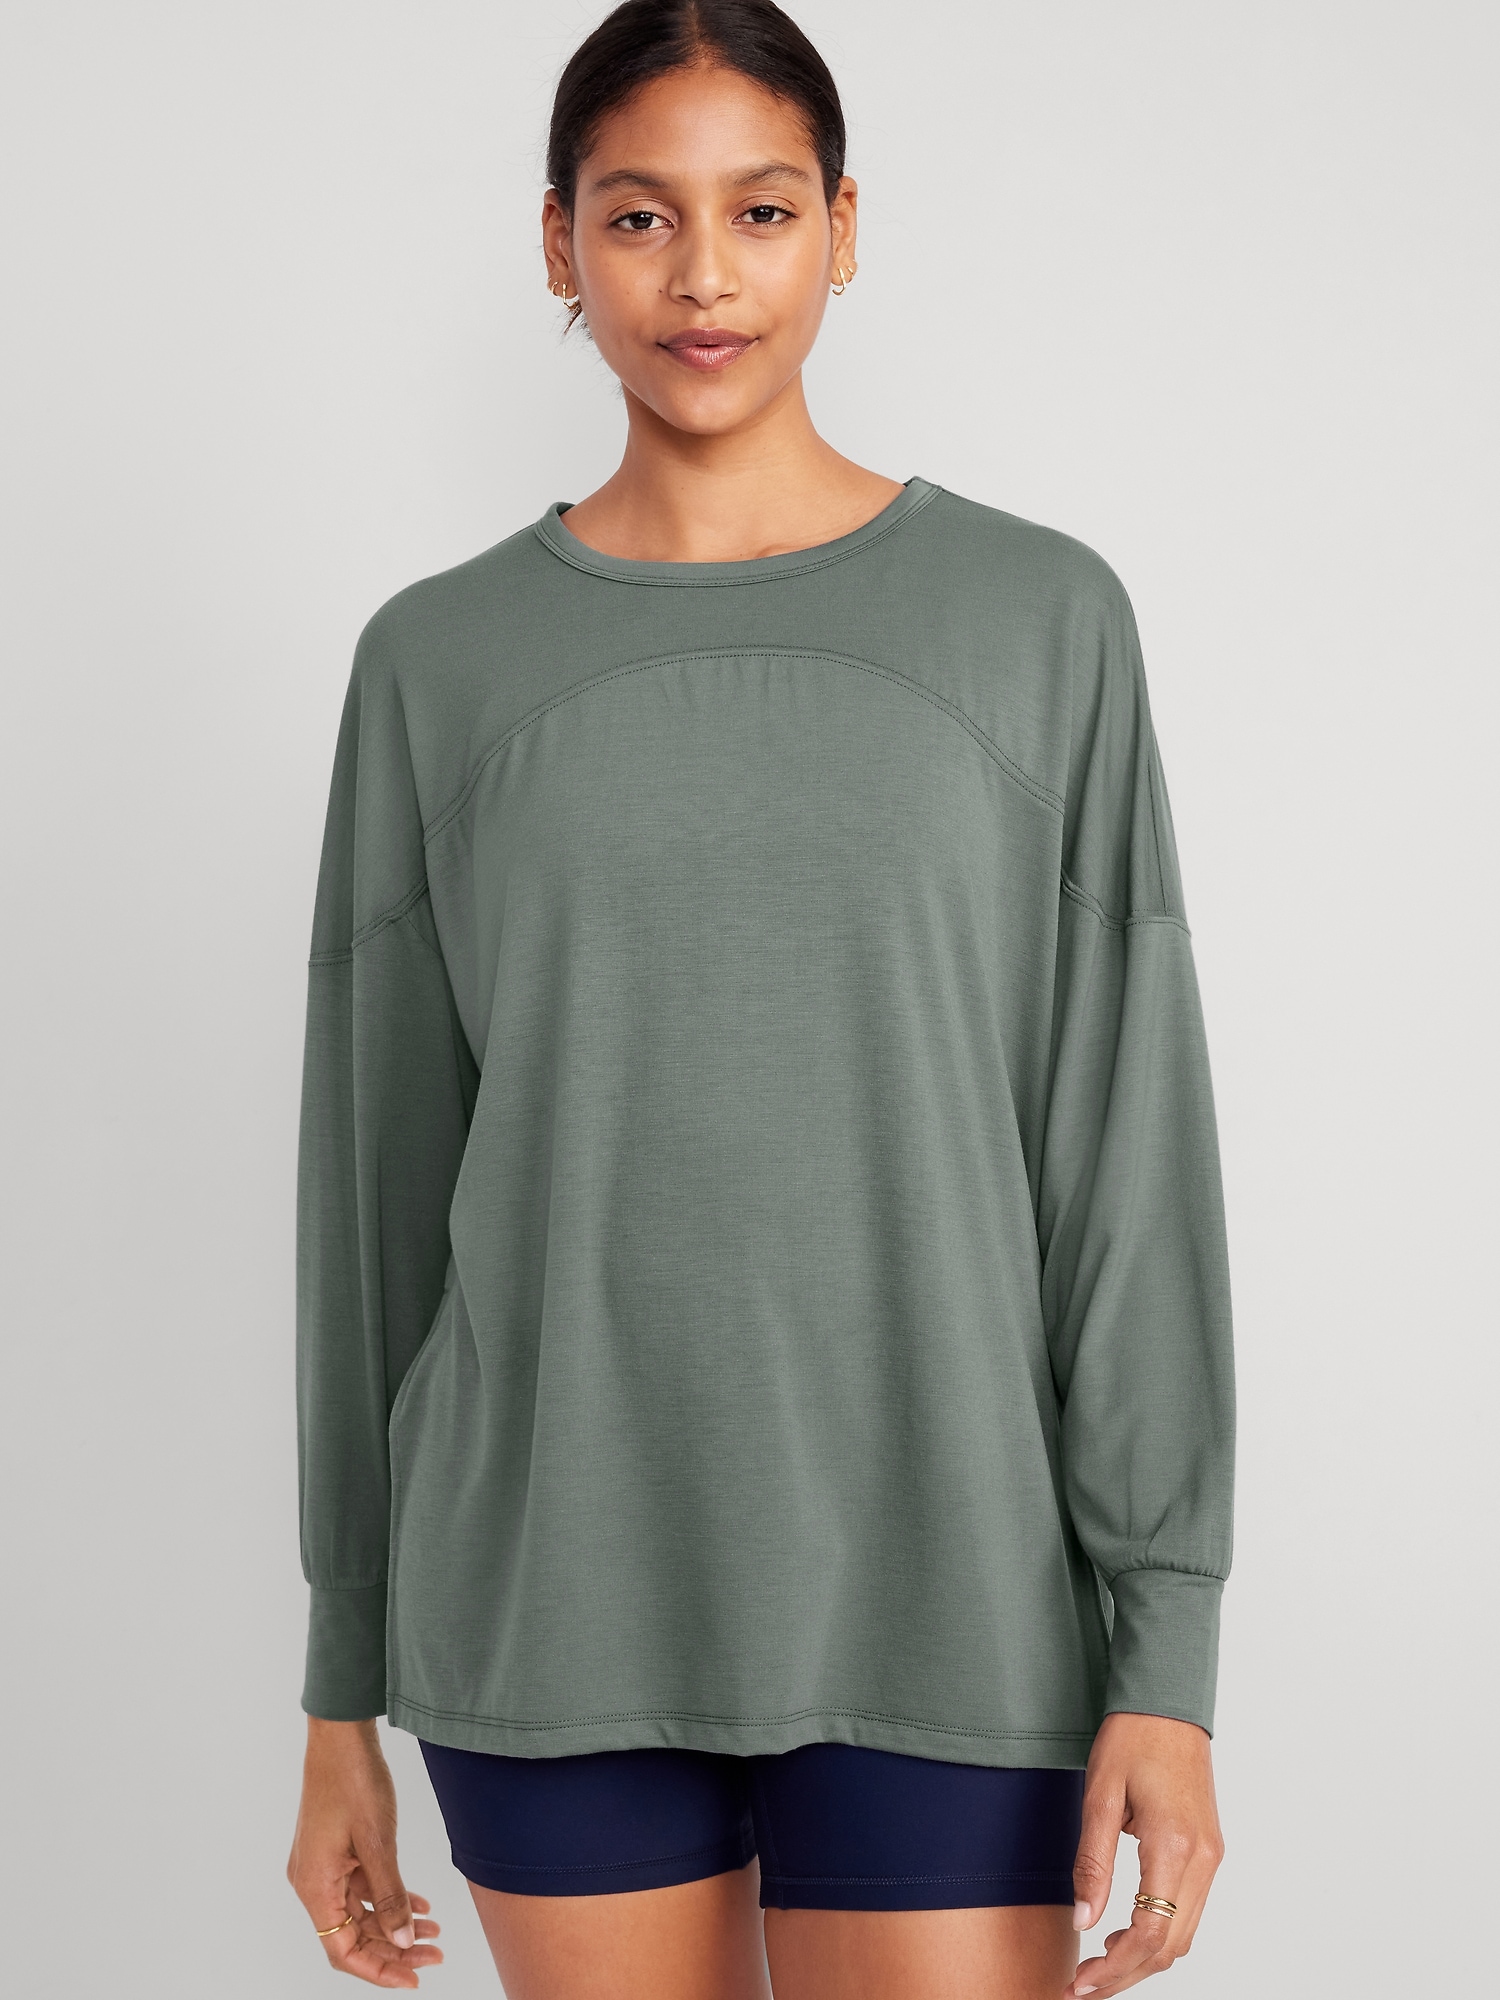 Oversized UltraLite All-Day Tunic